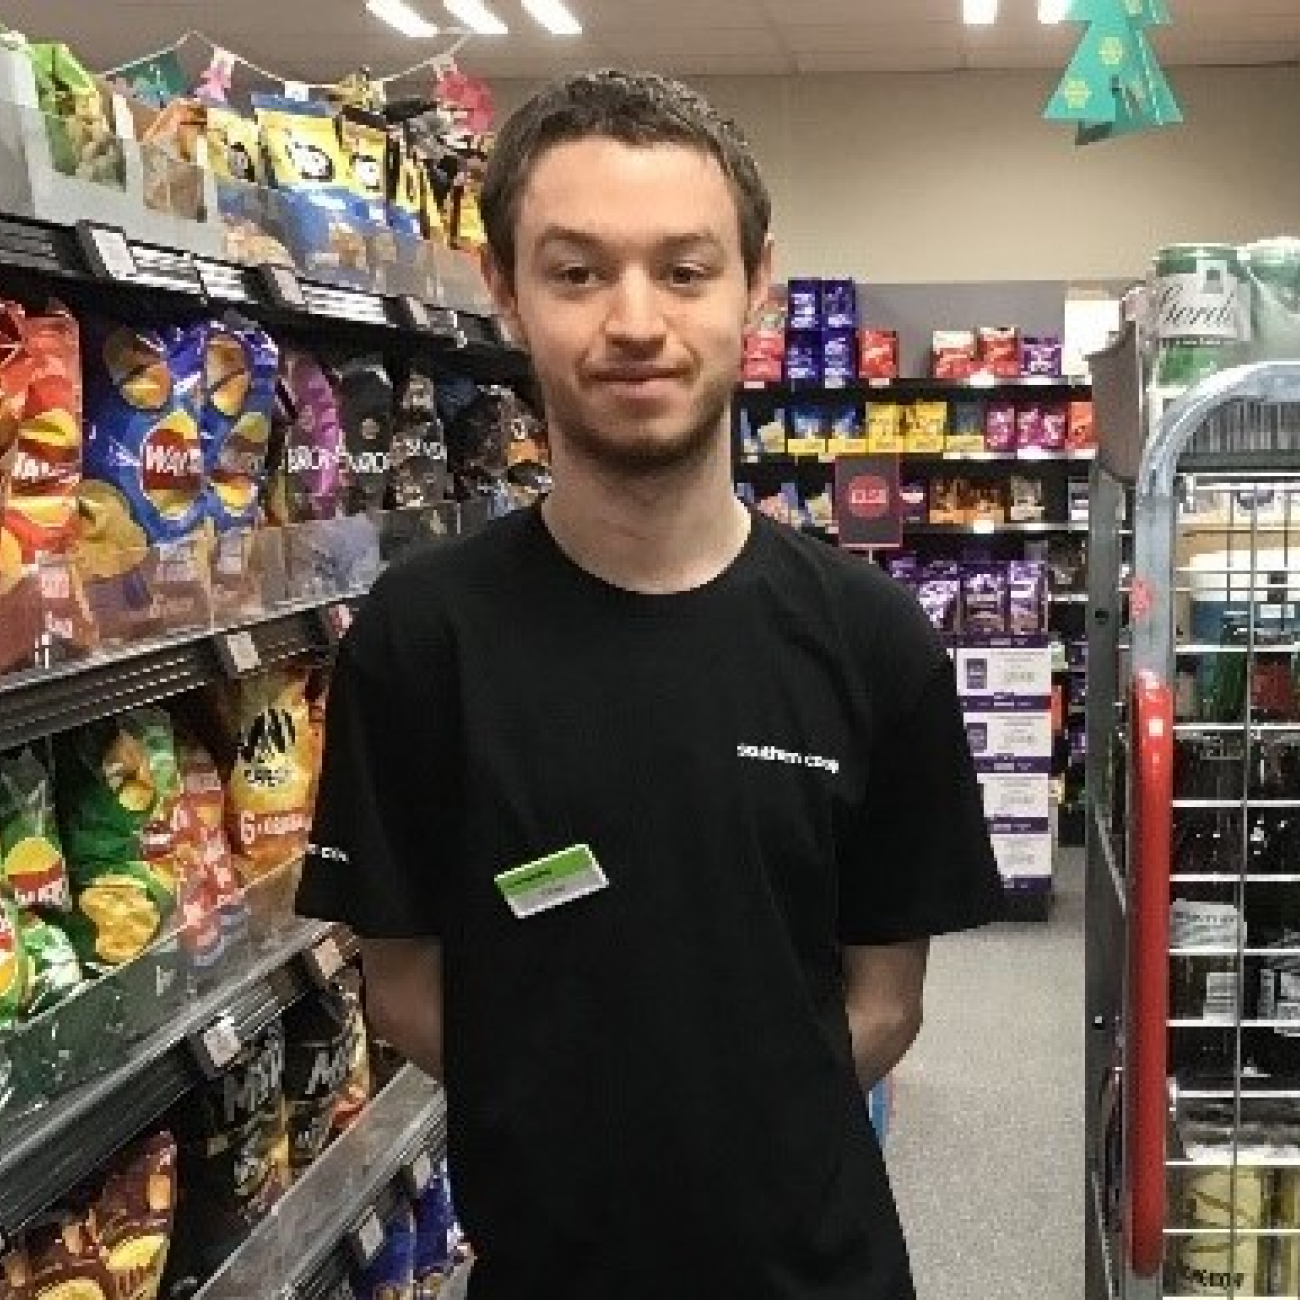 Orlan working at the Co-op on the shop floor